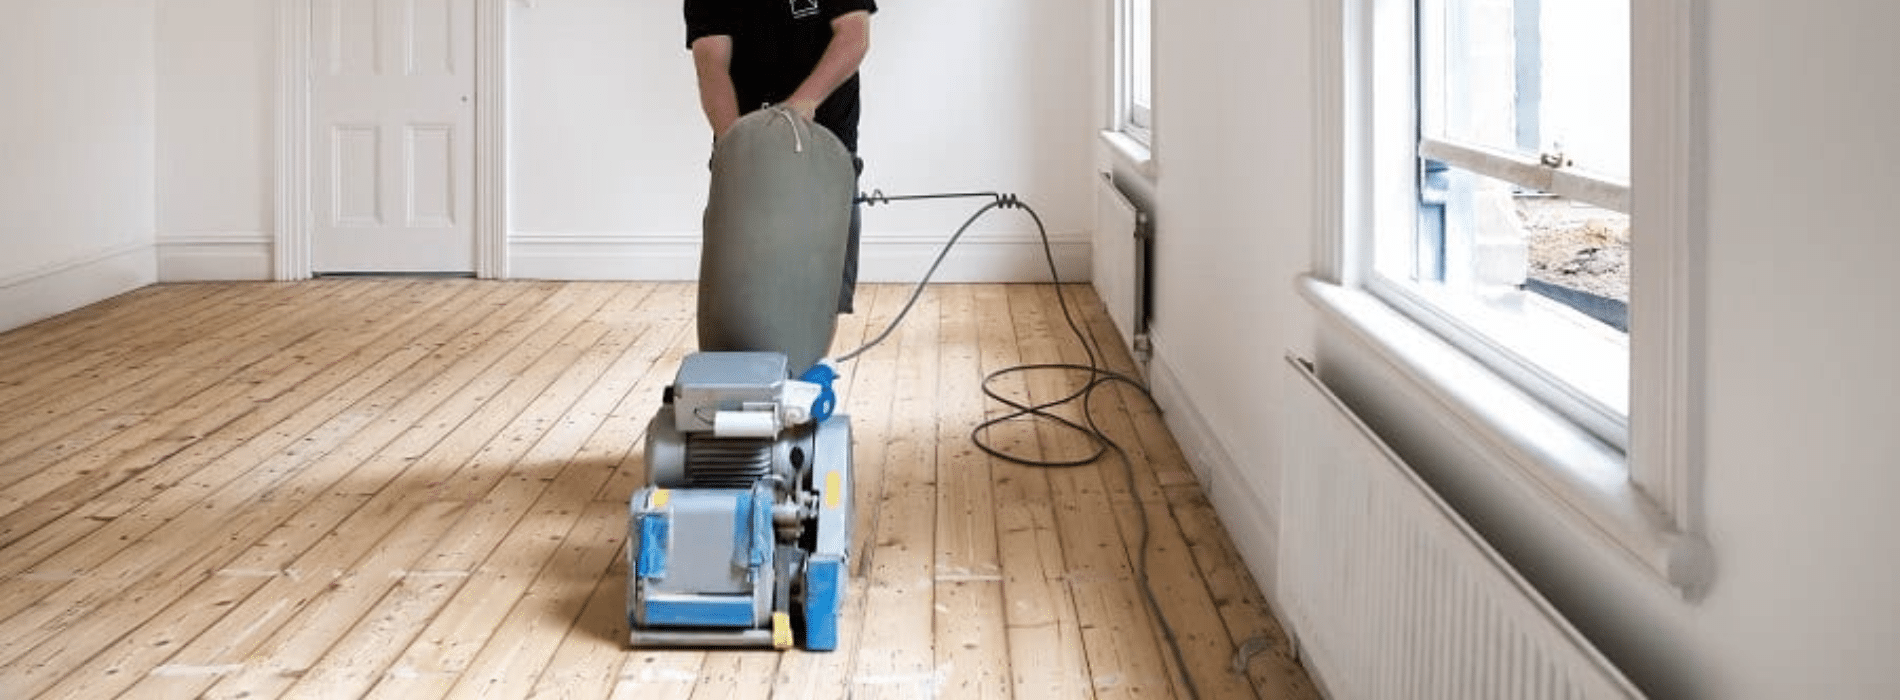 Mr Sander® are using a Bona Scorpion drum sander with a dimension of 200 mm, 1.5 kW power, and 240 V voltage in Woodford Green, IG8. The sander operates at a frequency of 50 Hz and is connected to a dust extraction system with a HEPA filter for a clean and efficient outcome.